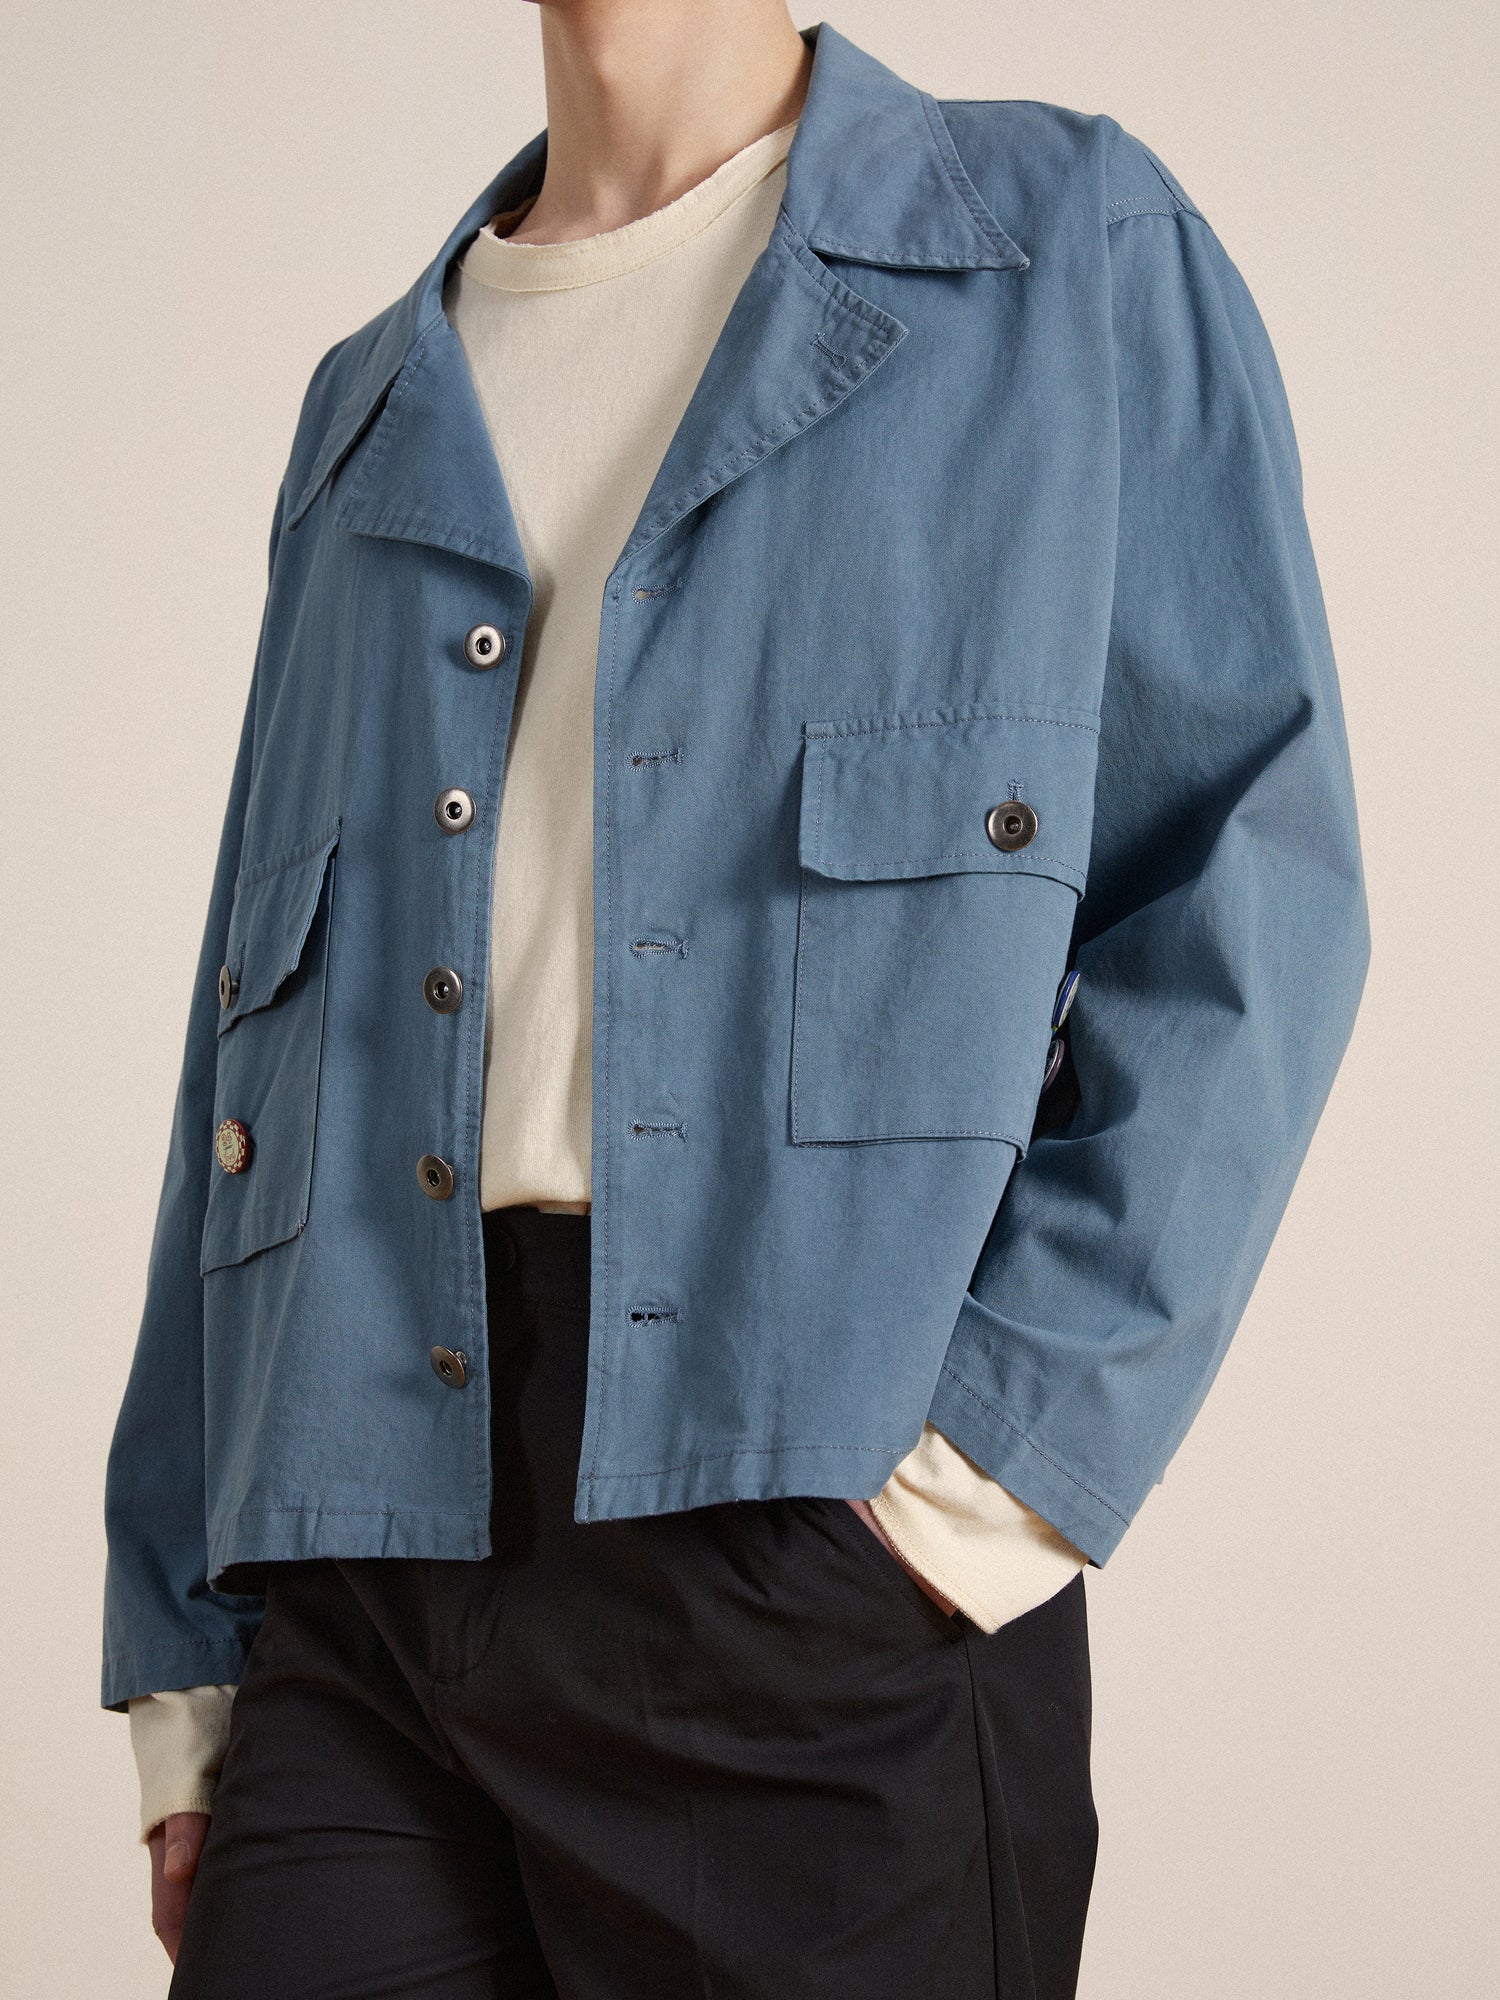 The model is wearing a blue Found Patina Work Jacket with buttons.